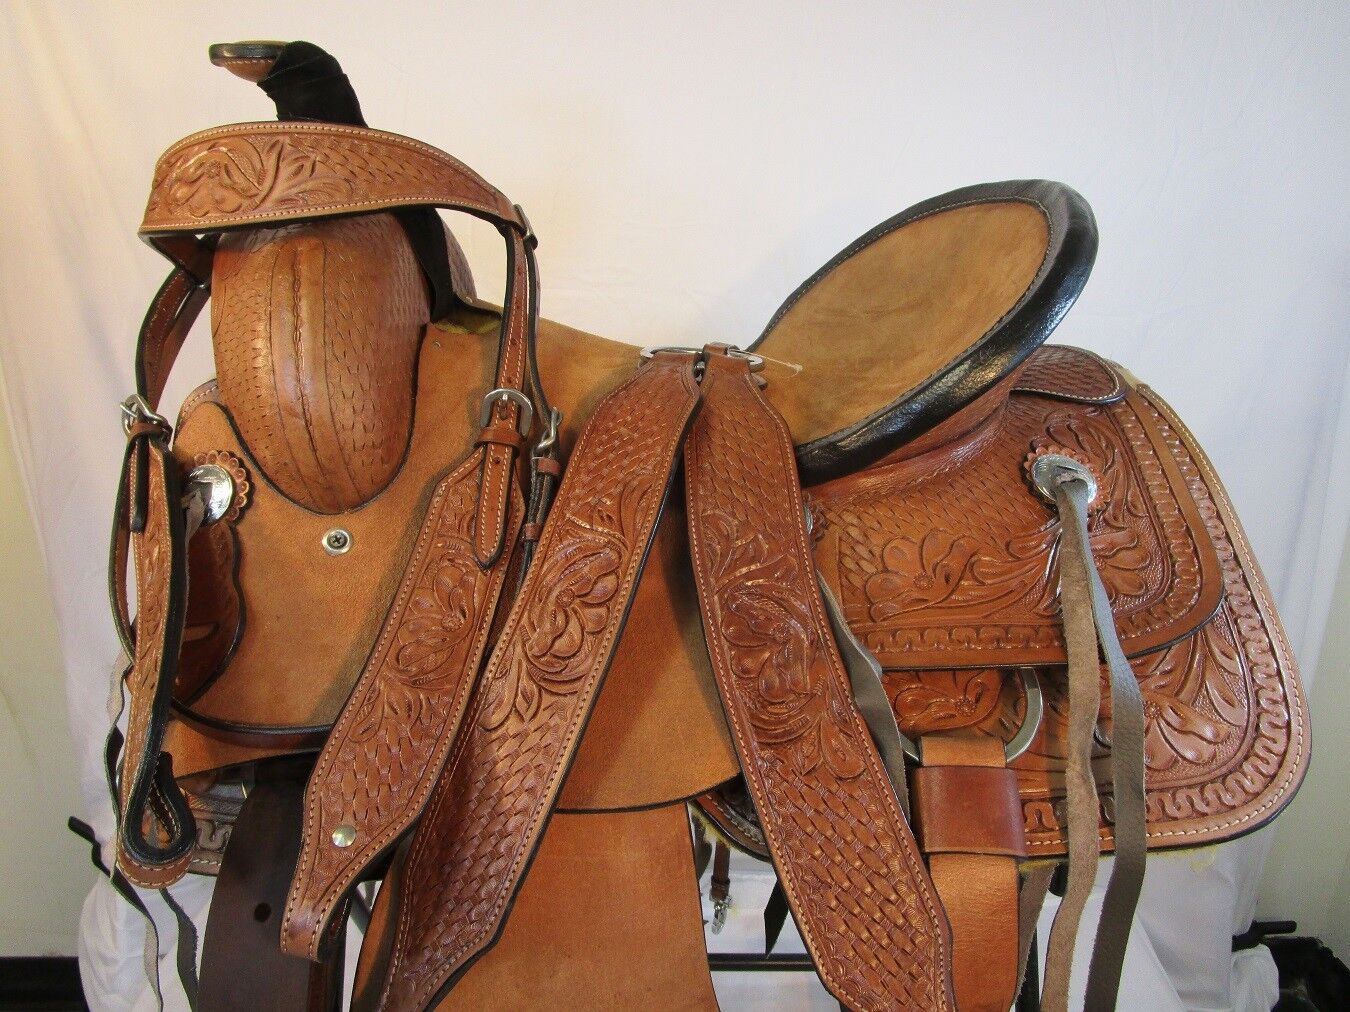 USED 16 17 18 TOOLED LEATHER TRAIL PLEASURE HORSE WESTERN RANCH ROPING SADDLE